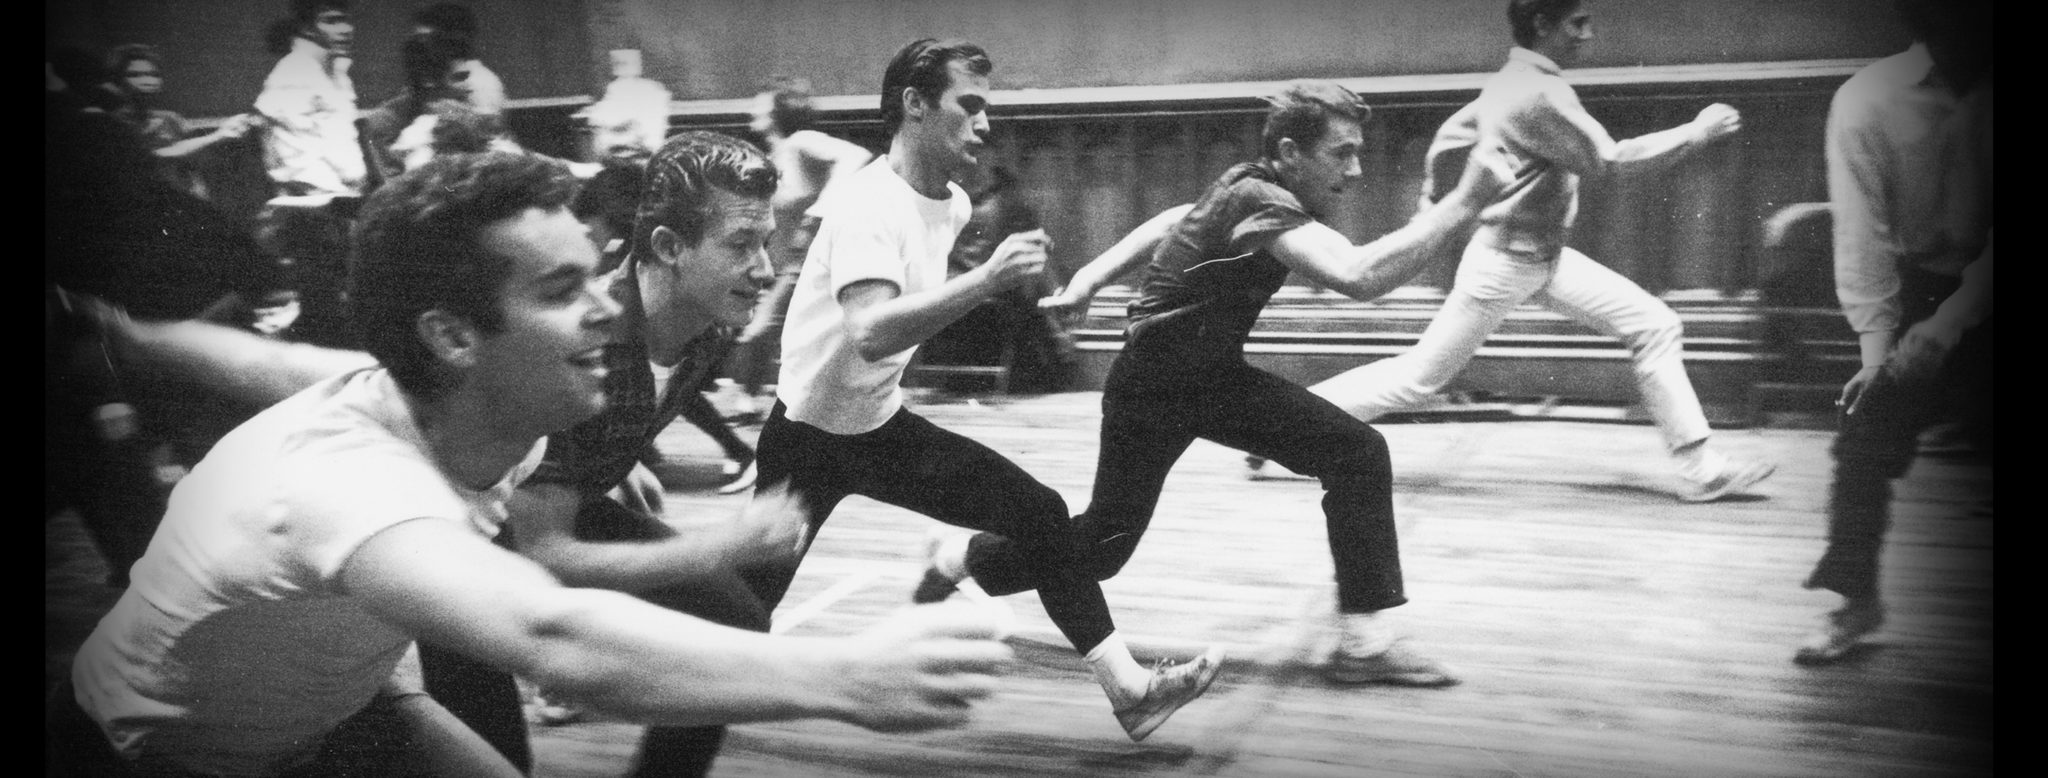 Dance rehearsals for 'West Side Story', a film musical directed by Jerome Robbins and Robert Wise, with words and music by Leonard Bernstein and Stephen Sondheim. / Credit: Ernst Haas/Getty Images